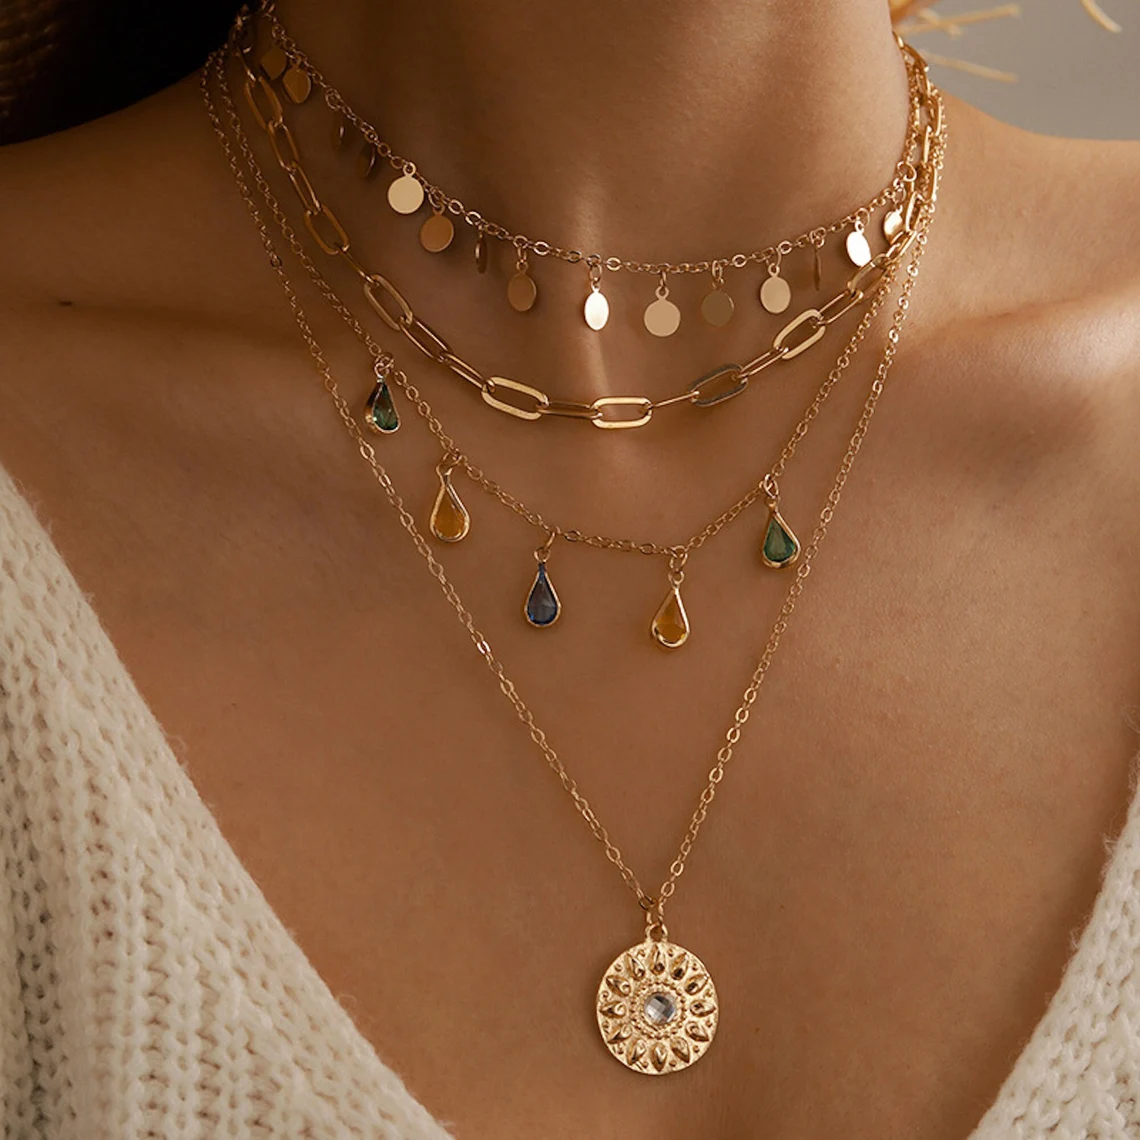 layers of necklaces with gemstones